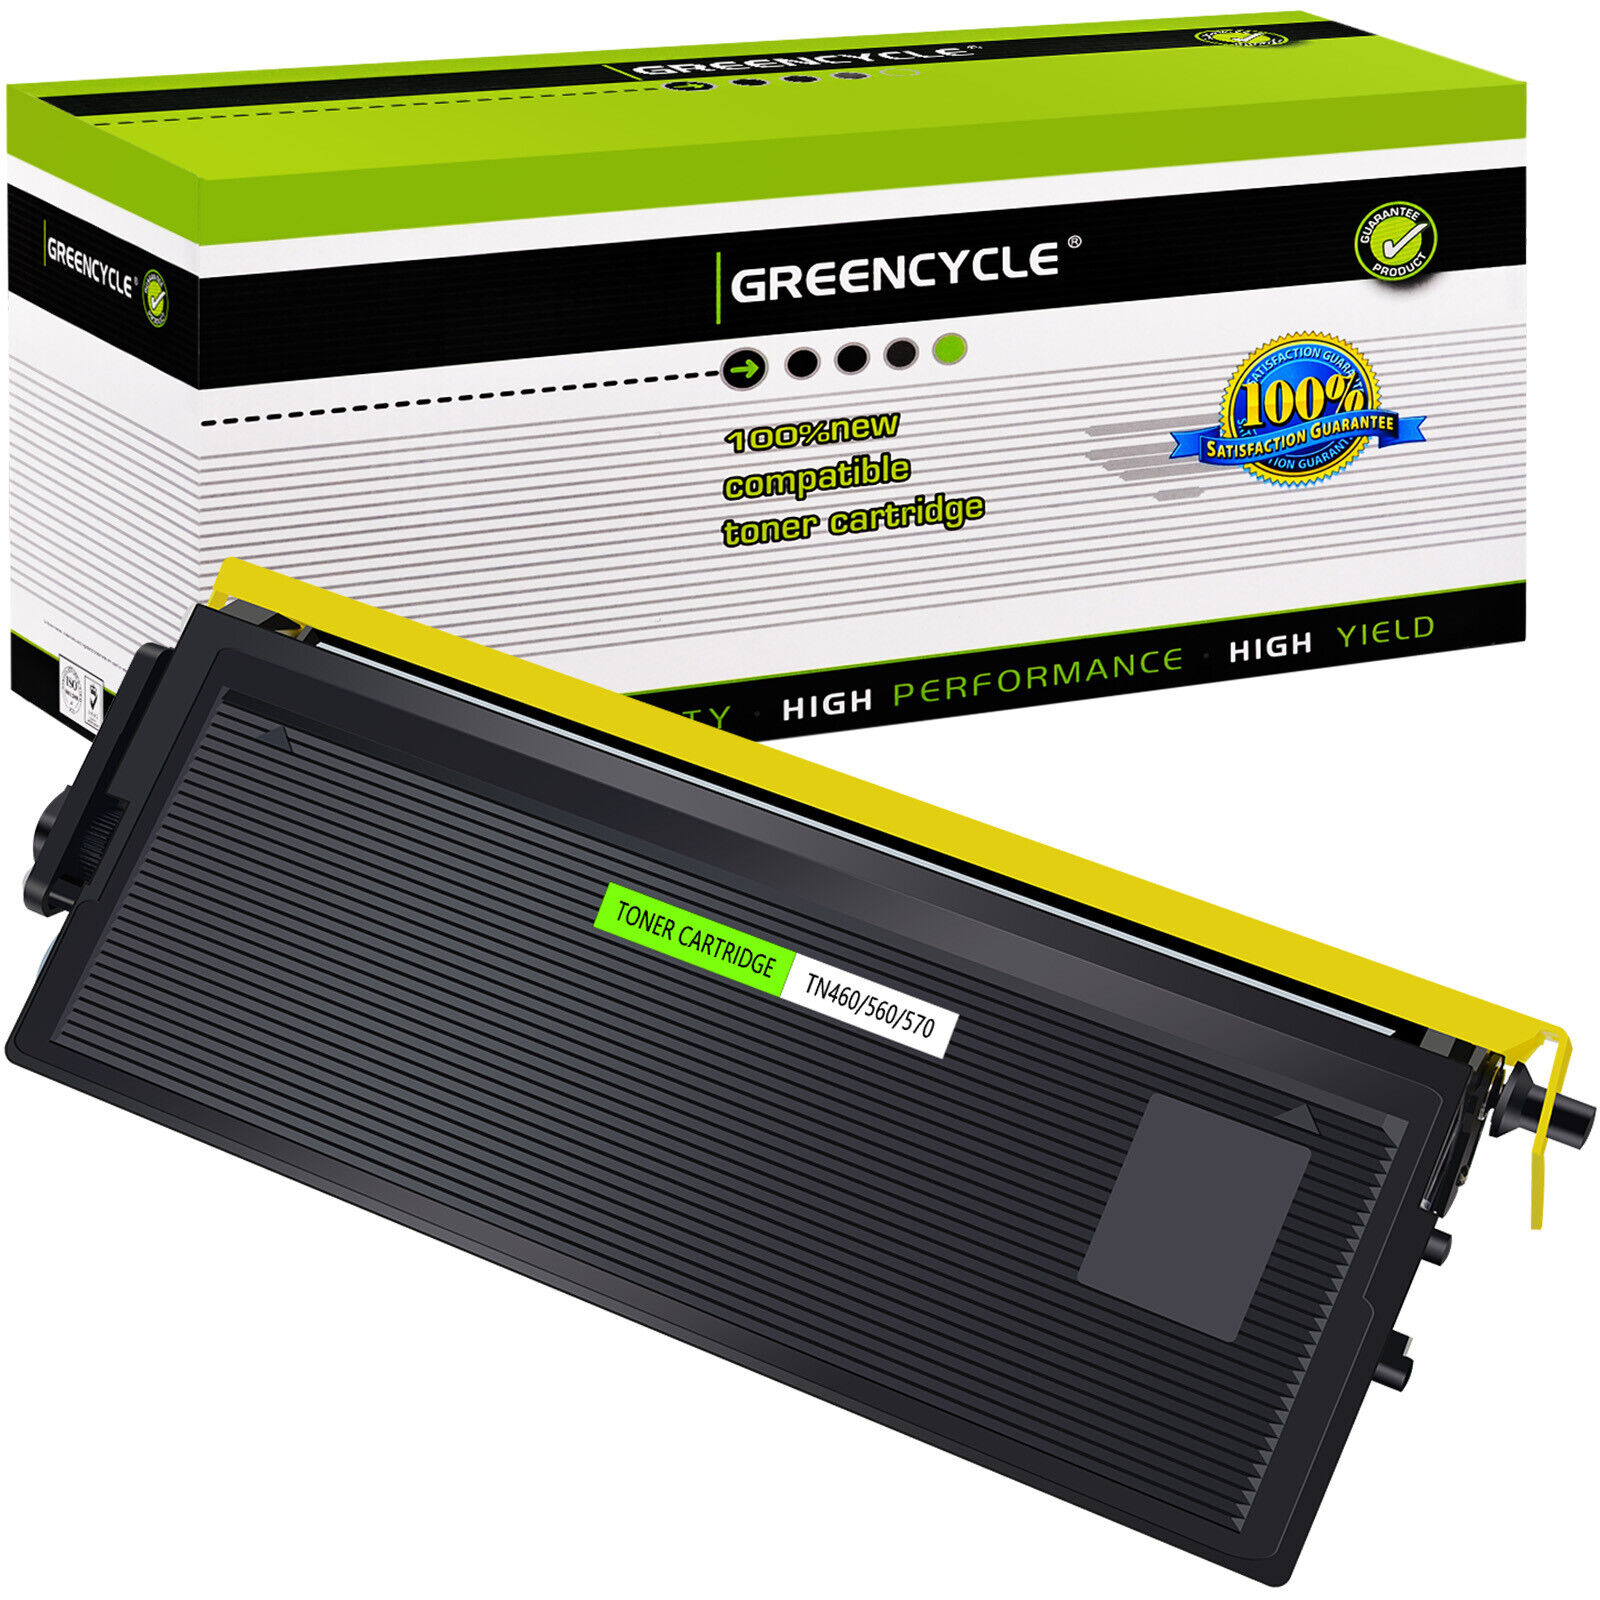 TN460 TN-460 Toner Cartridge for Brother DCP-1200 DCP-1400 HL-1435 HL-1440 1450